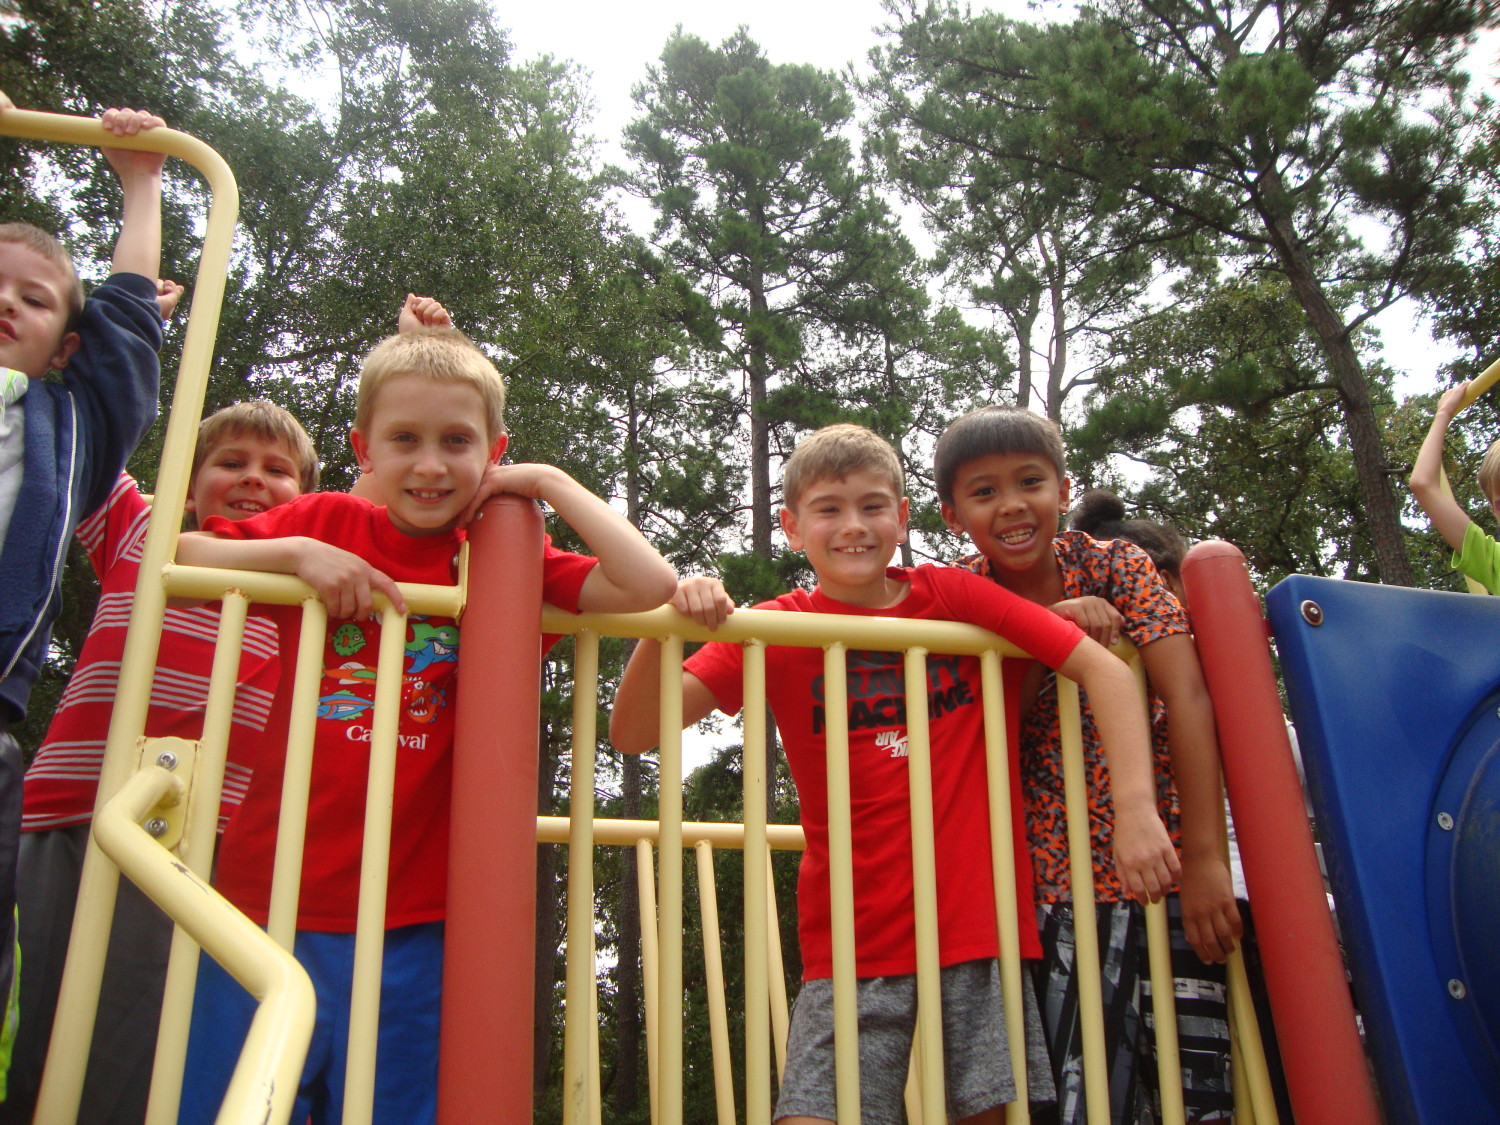 Third graders at Giesinger Elementary enjoy recess with friends.